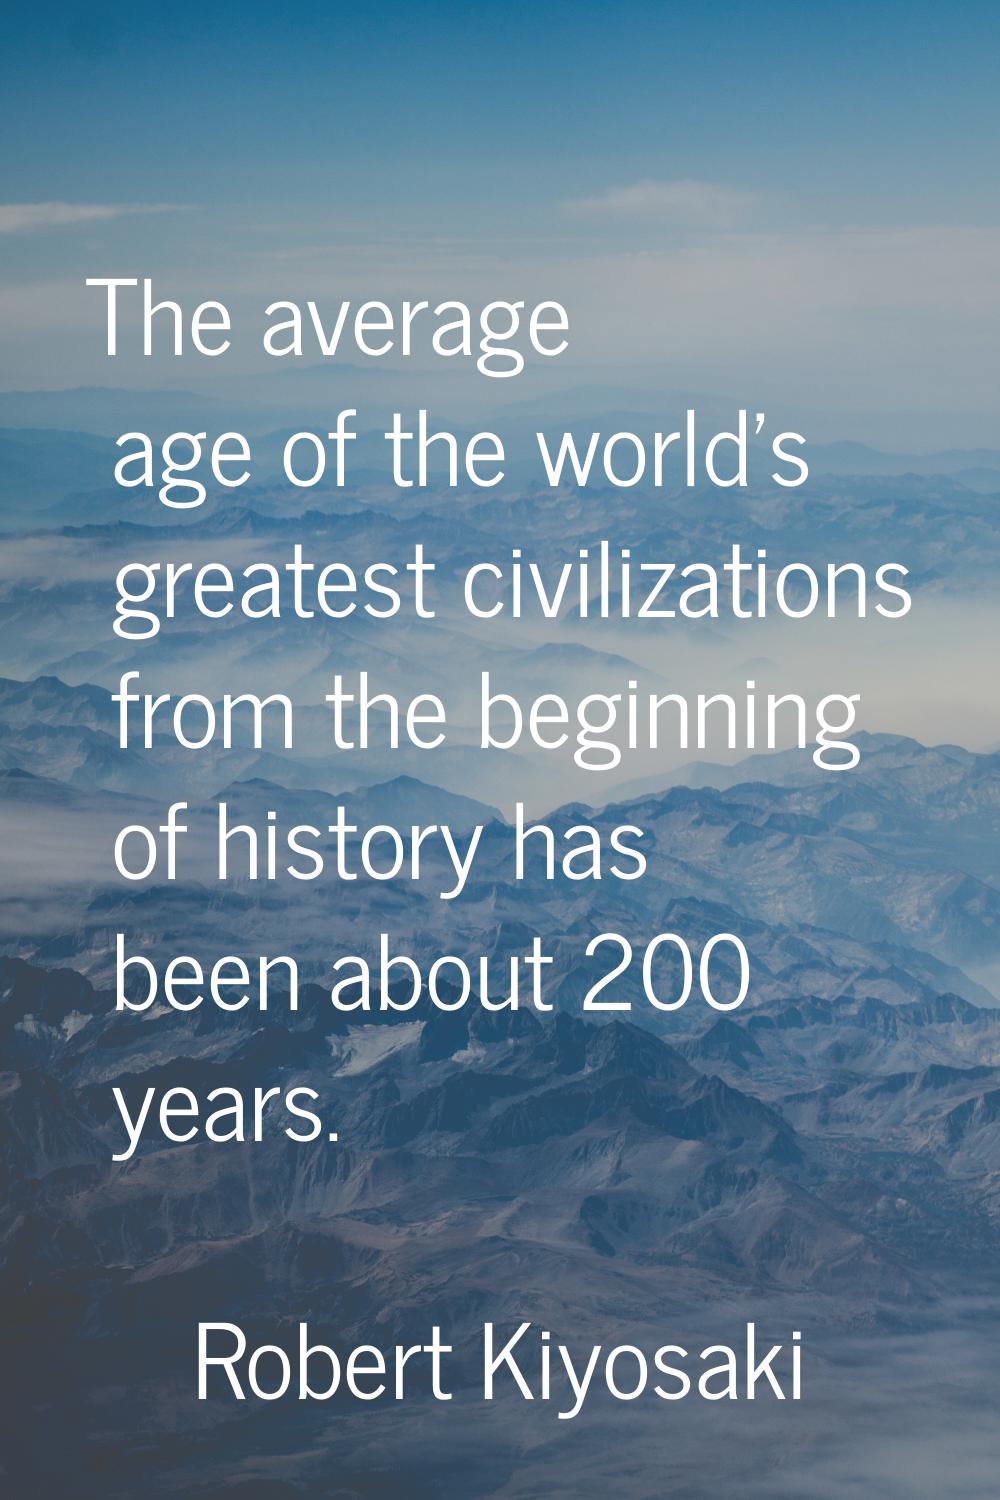 The average age of the world's greatest civilizations from the beginning of history has been about 